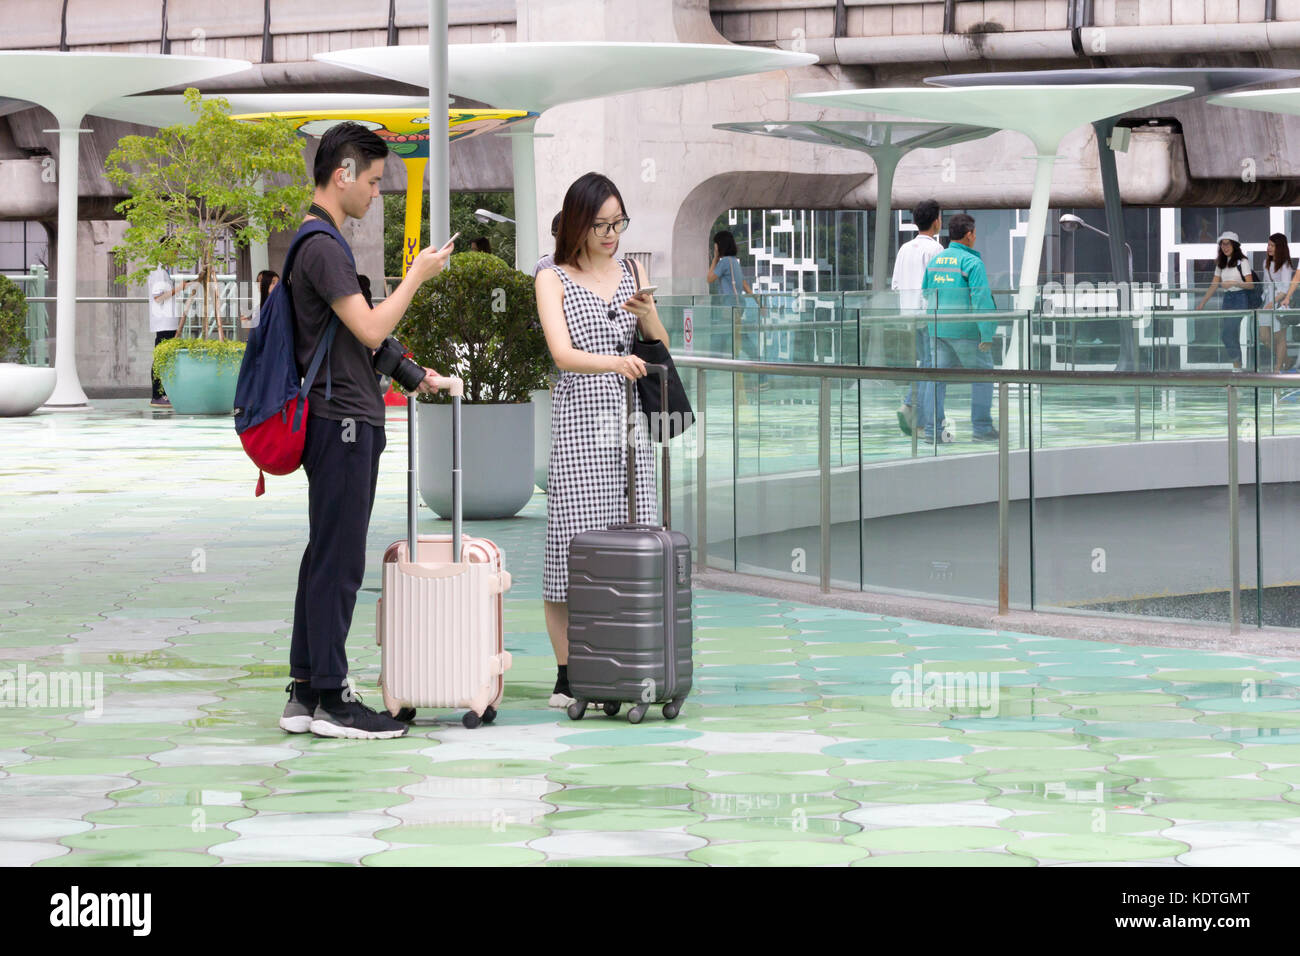 Asian couple with suitcases consulting their phones for directions, Bangkok, Thailand Stock Photo